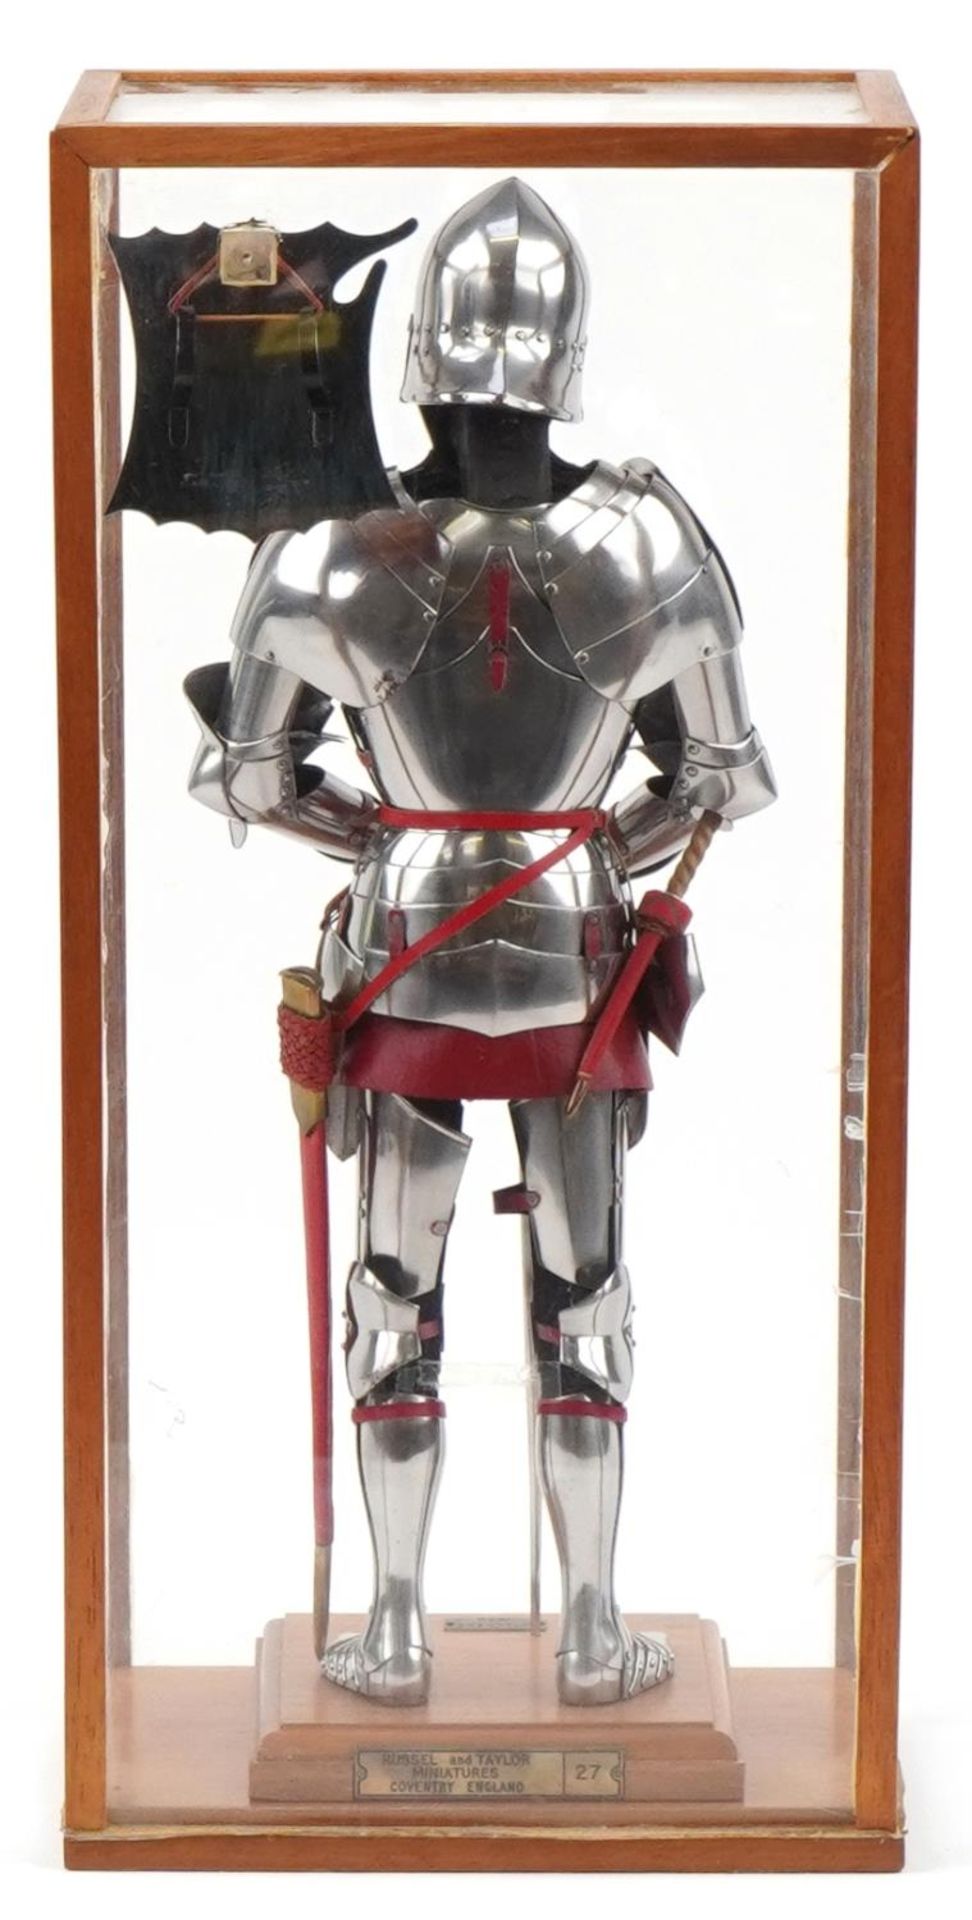 Russell & Taylor model of 1460 Milanese armour, edition number 27, housed in a display case, with - Bild 3 aus 6